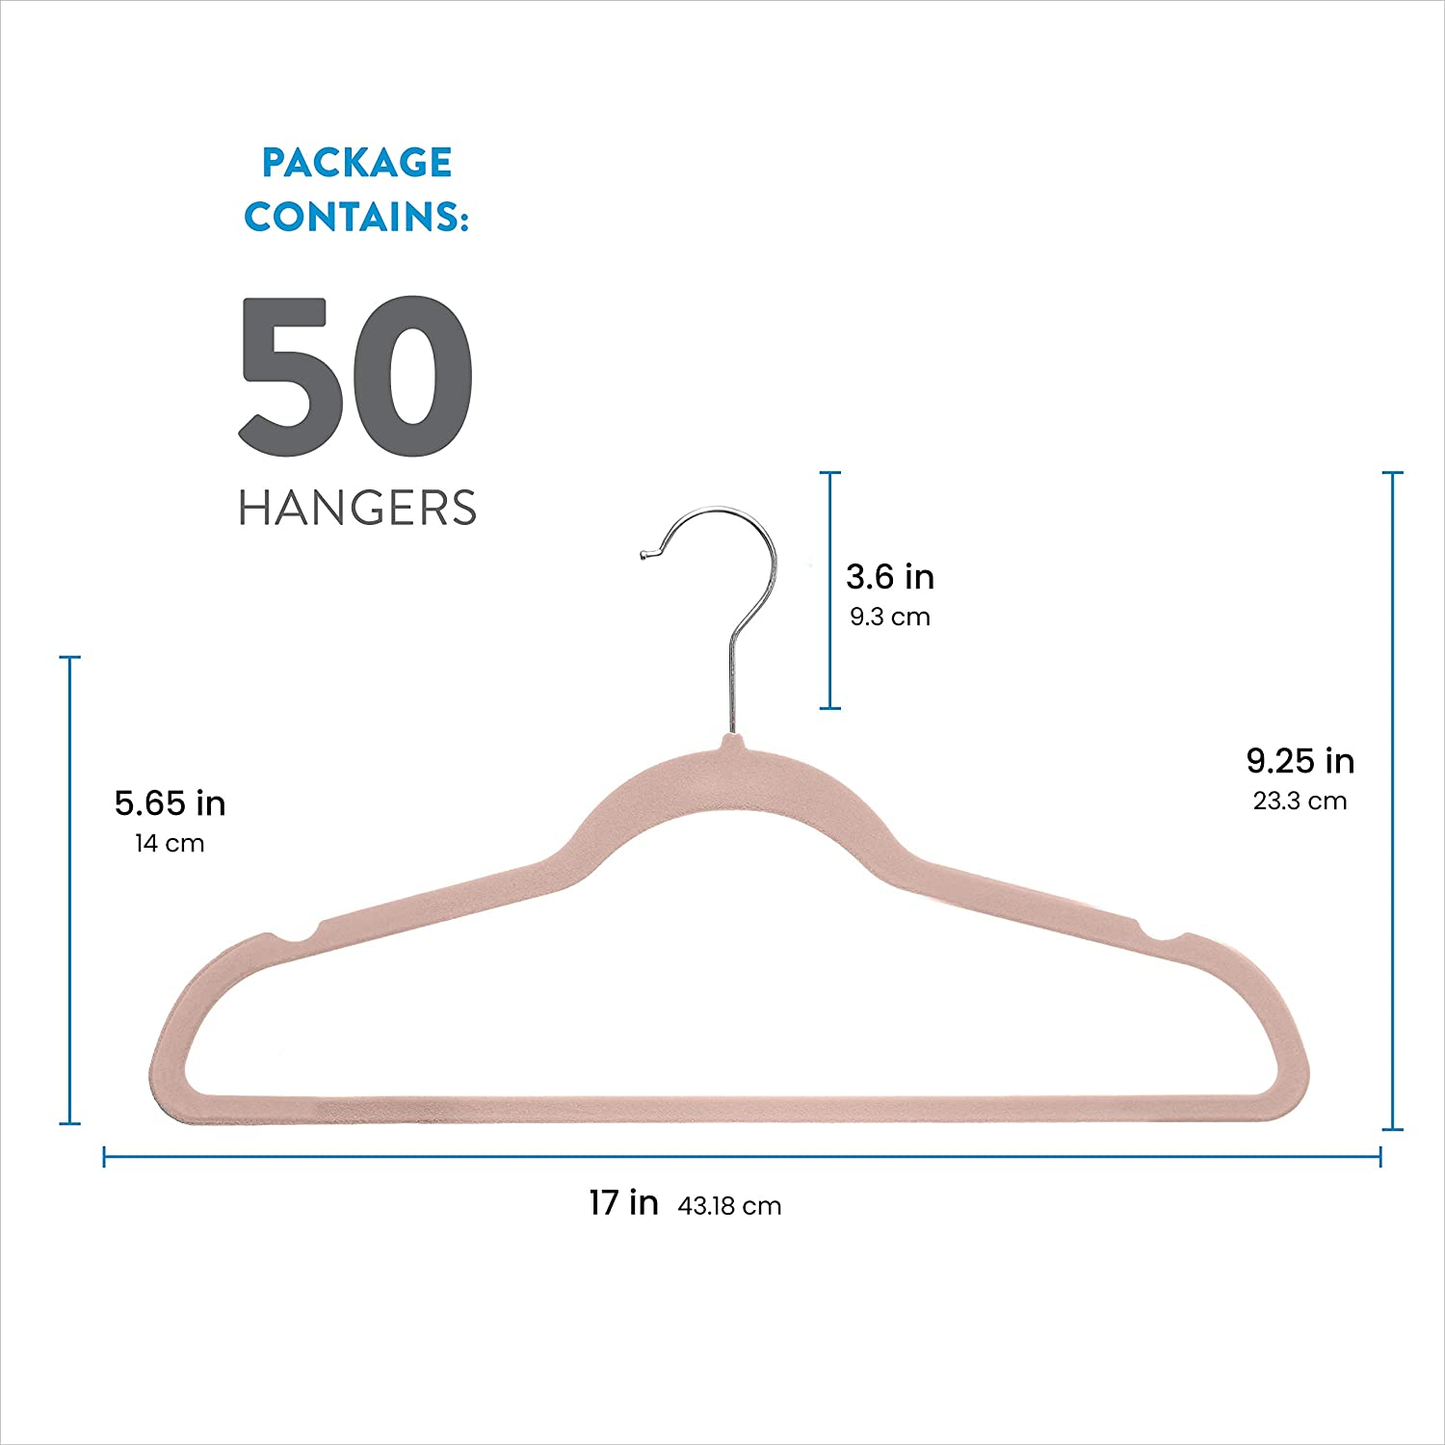 Nonslip Velvet Hangers, Suit Hangers (50 Pack) Ultrathin Space-Saving 360 Degree Swivel Hook Strong and Durable Clothes Hangers Hold Up-To 10 Lbs, for Coats Jackets, Pants (Blush / Light Pink)